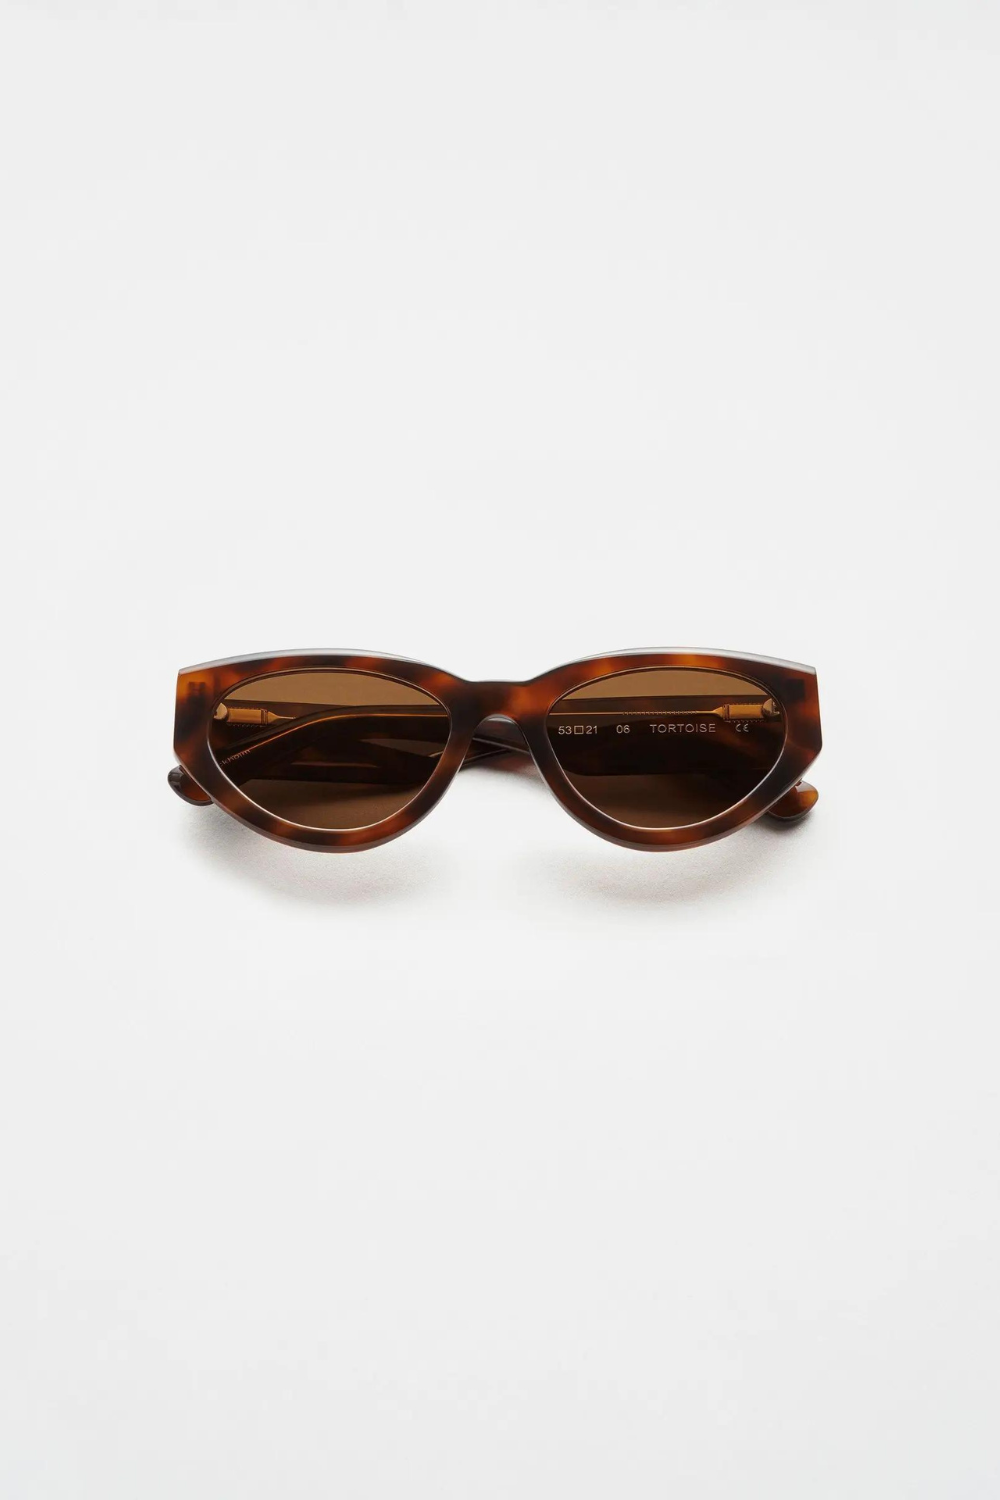 06 Tortoise Shell - By CHIMI